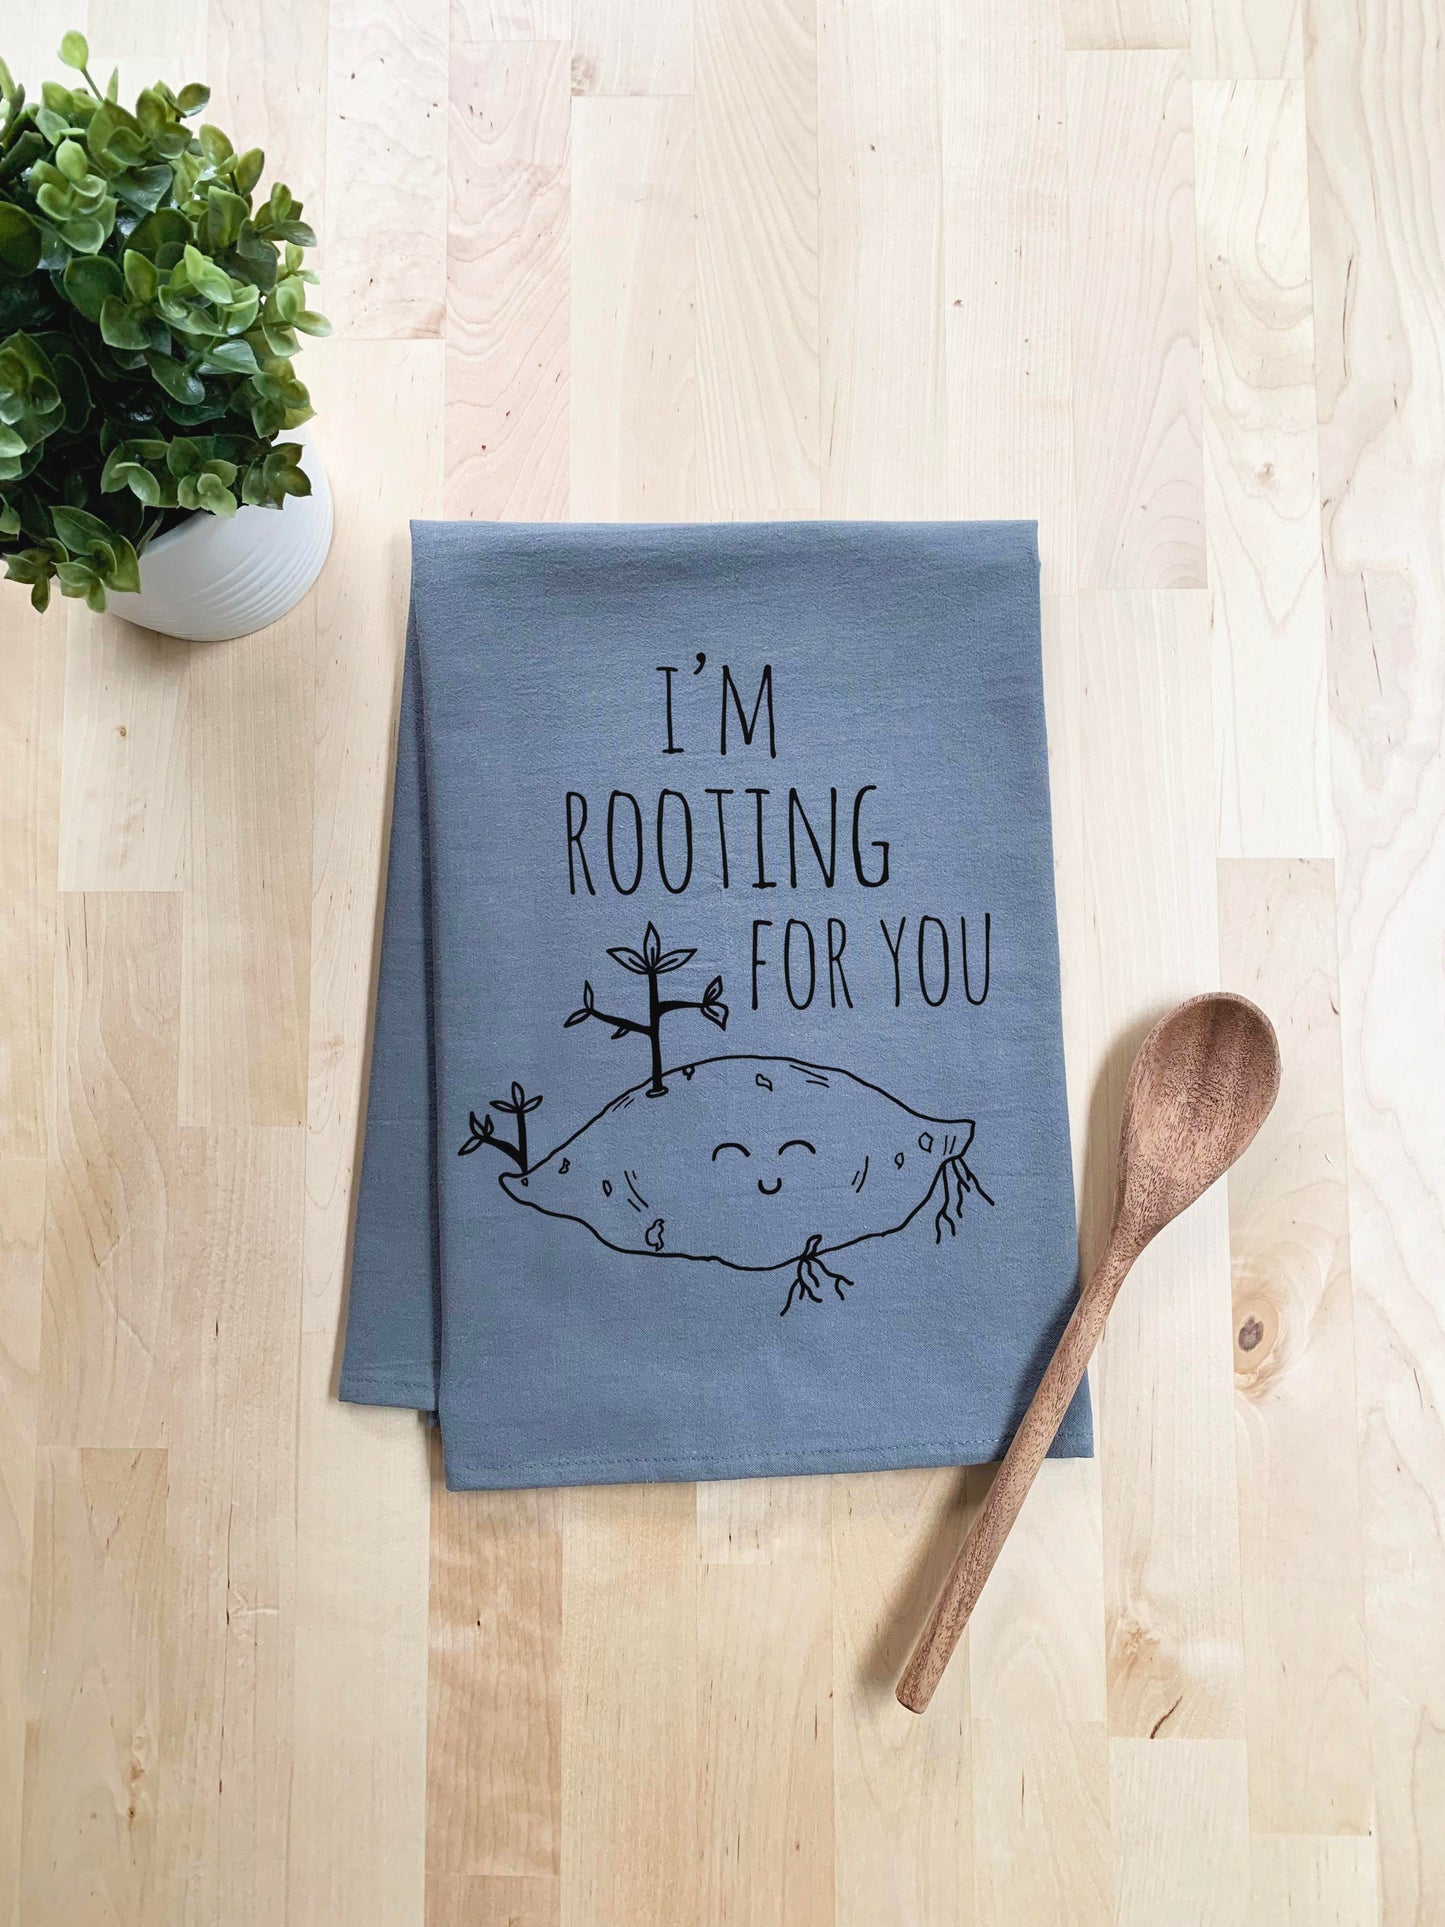 I'm Rooting For You Dish Towel - White Or Gray - MoonlightMakers